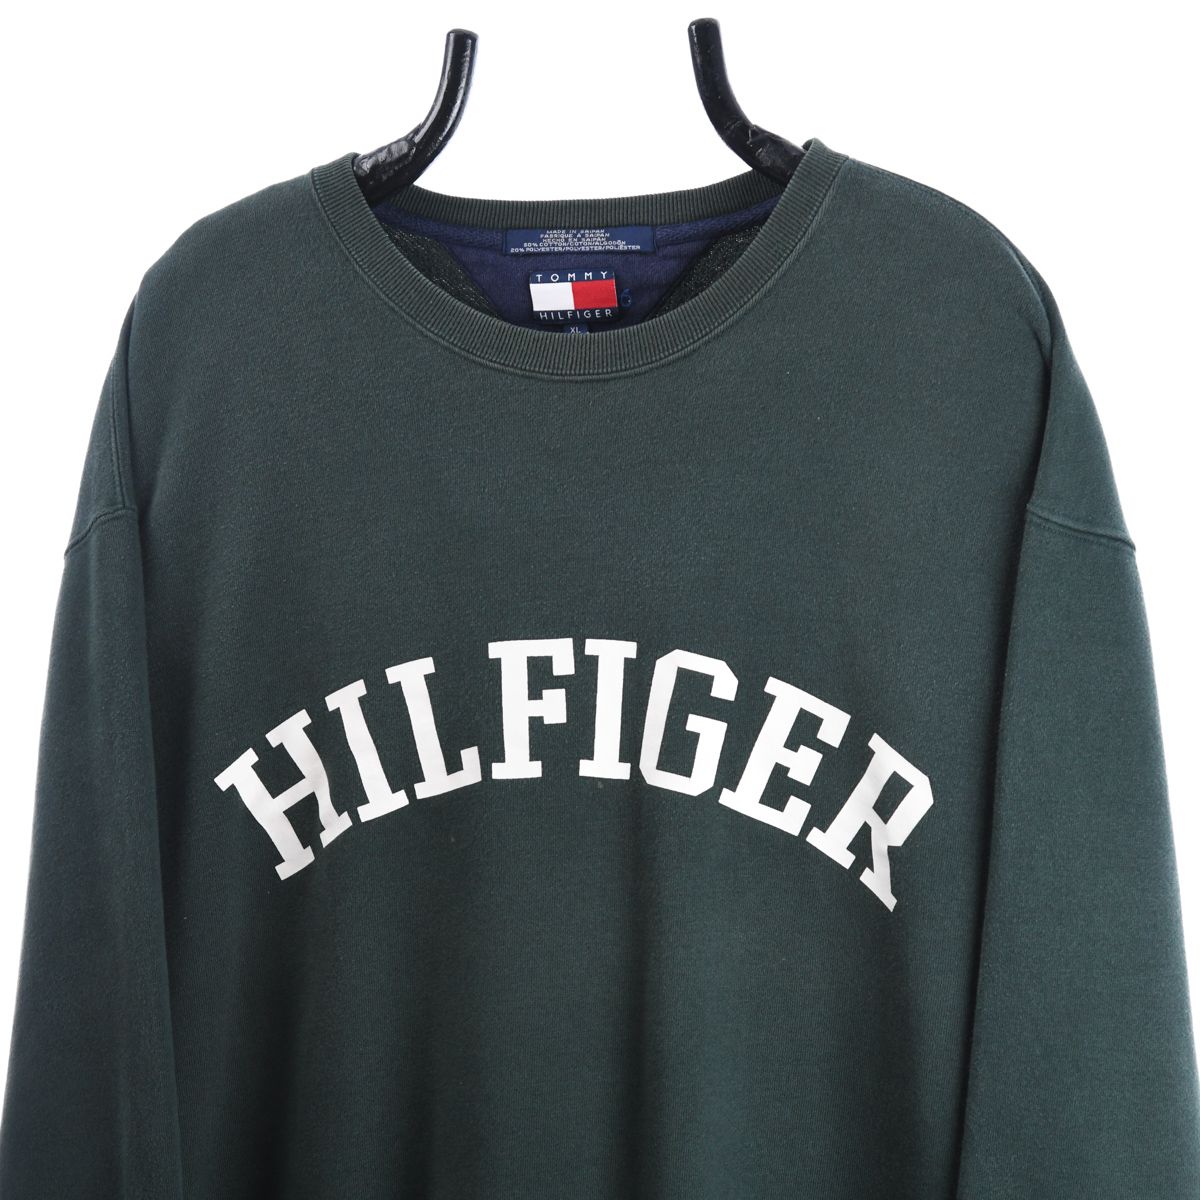 Tommy Hilfiger Printed arc Spell Out Design Sweatshirt